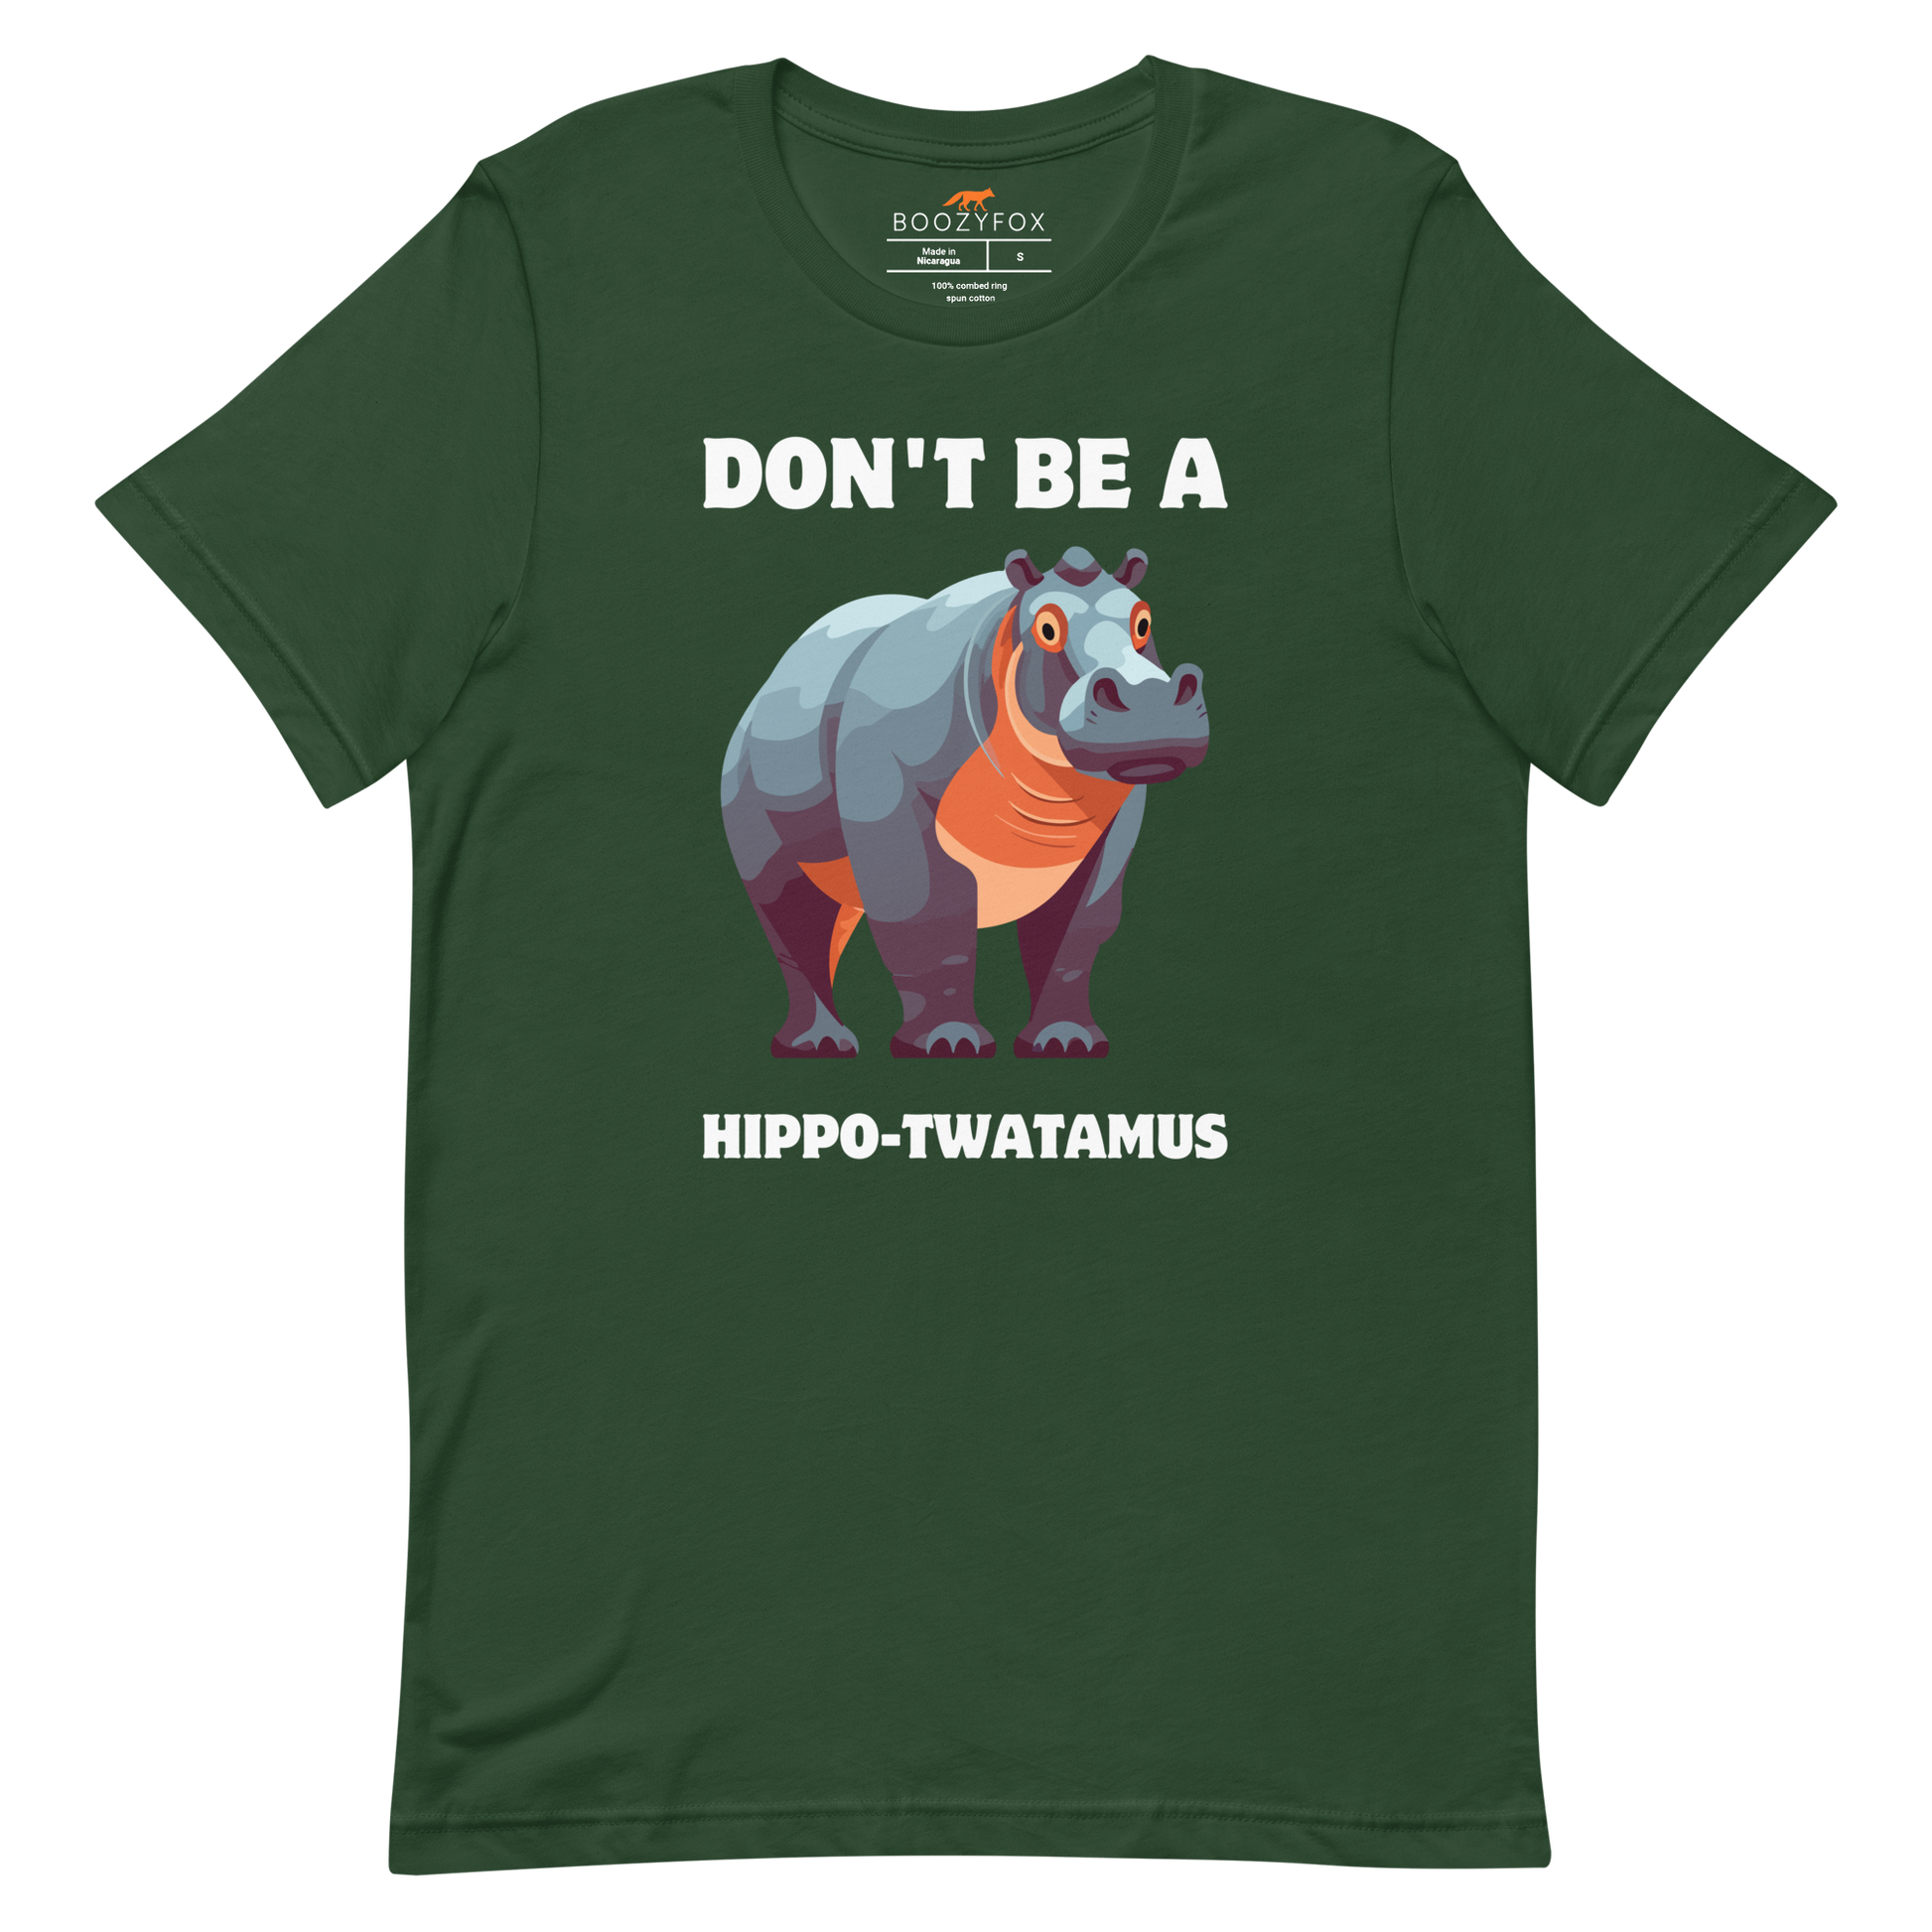 Forest Green Premium Hippo Tee featuring a Don't Be a Hippo-Twatamus graphic on the chest - Funny Graphic Hippo Tees - Boozy Fox